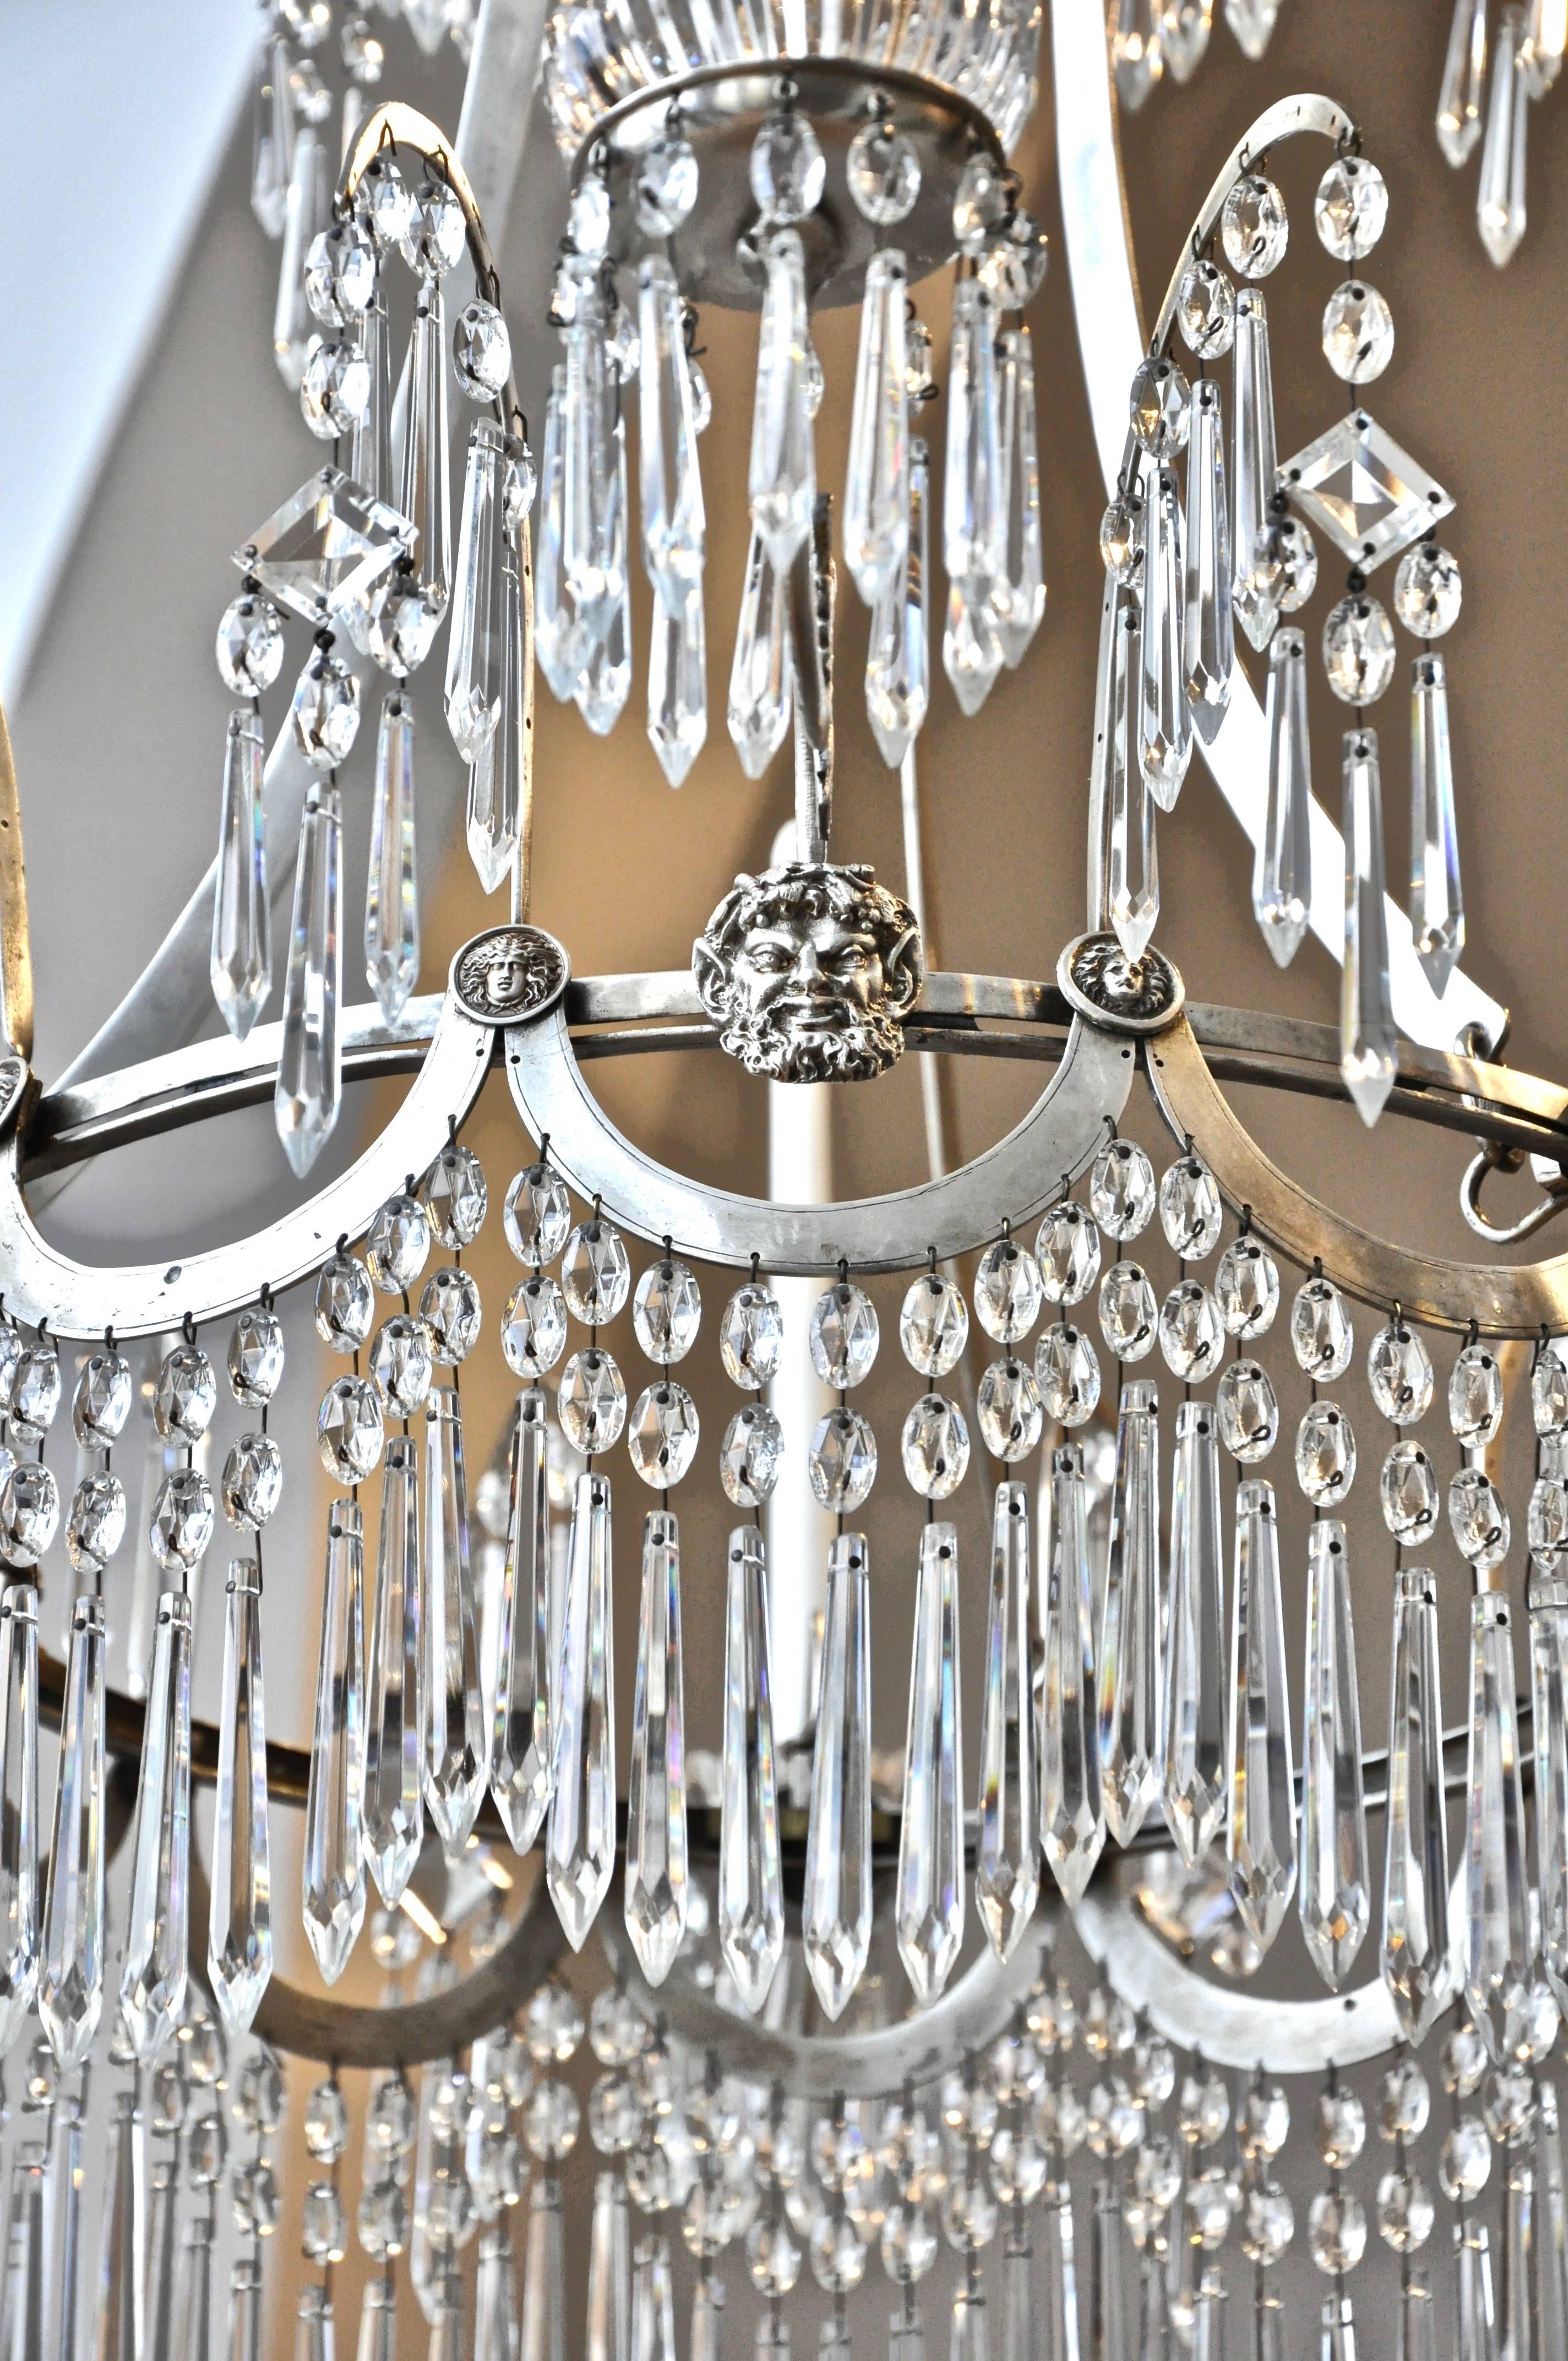 Hand-Crafted 19th Century Baltic Neoclassical Silvered Chandelier